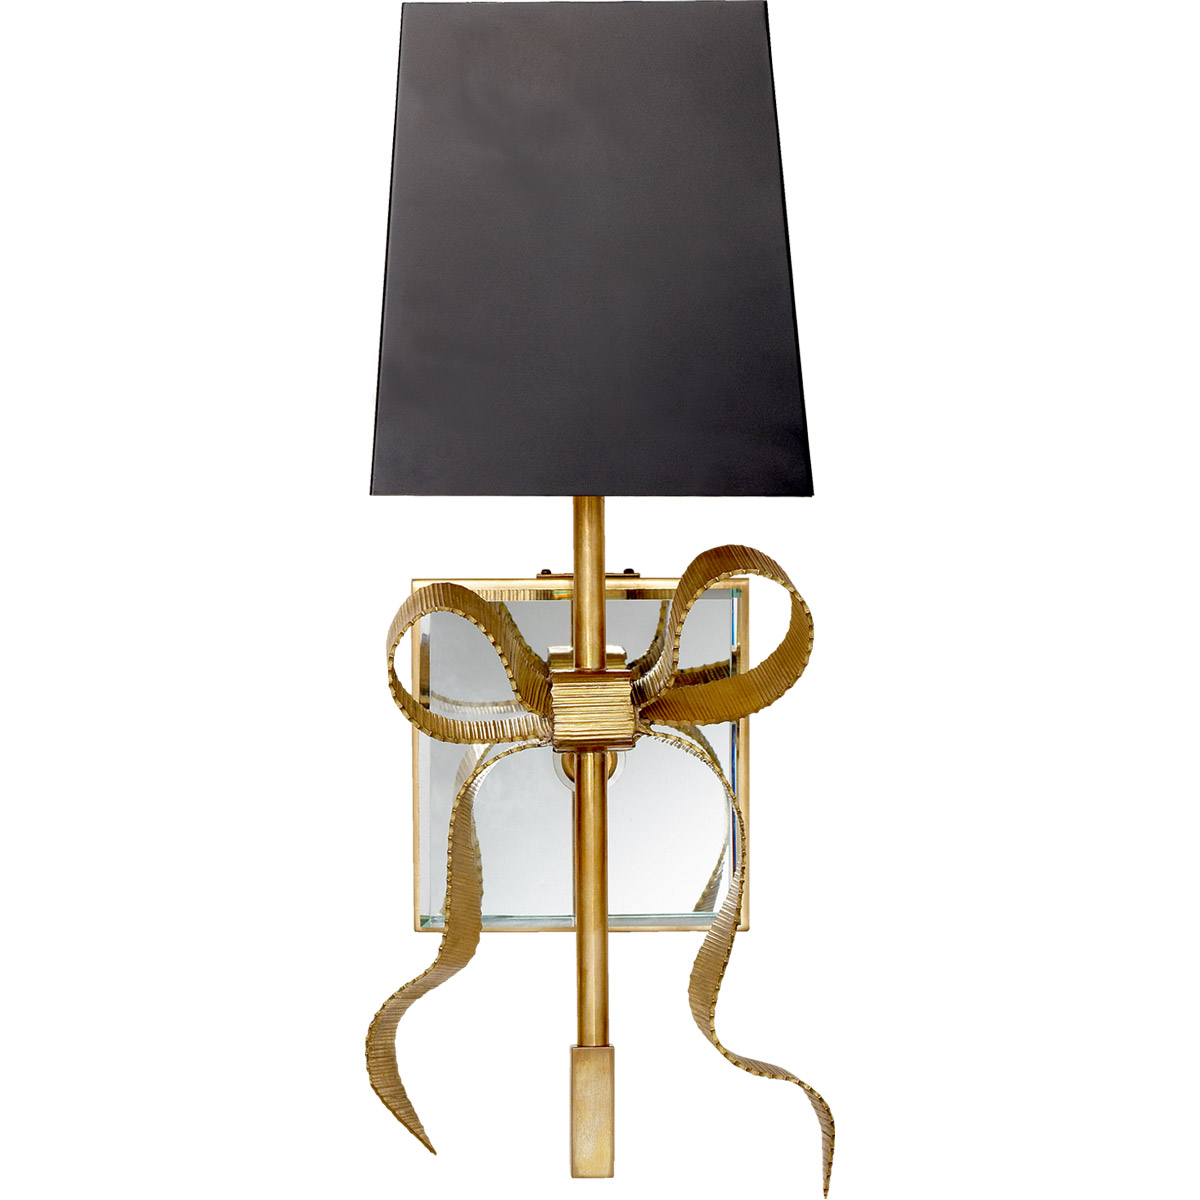 Visual Comfort Signature Light Soft inch Bow kate in york Black, KS2008SB-B Wall | Collection Visual new Gros-Grain Matte Brass spade Comfort Small 5 Light 1 Sconce Ellery